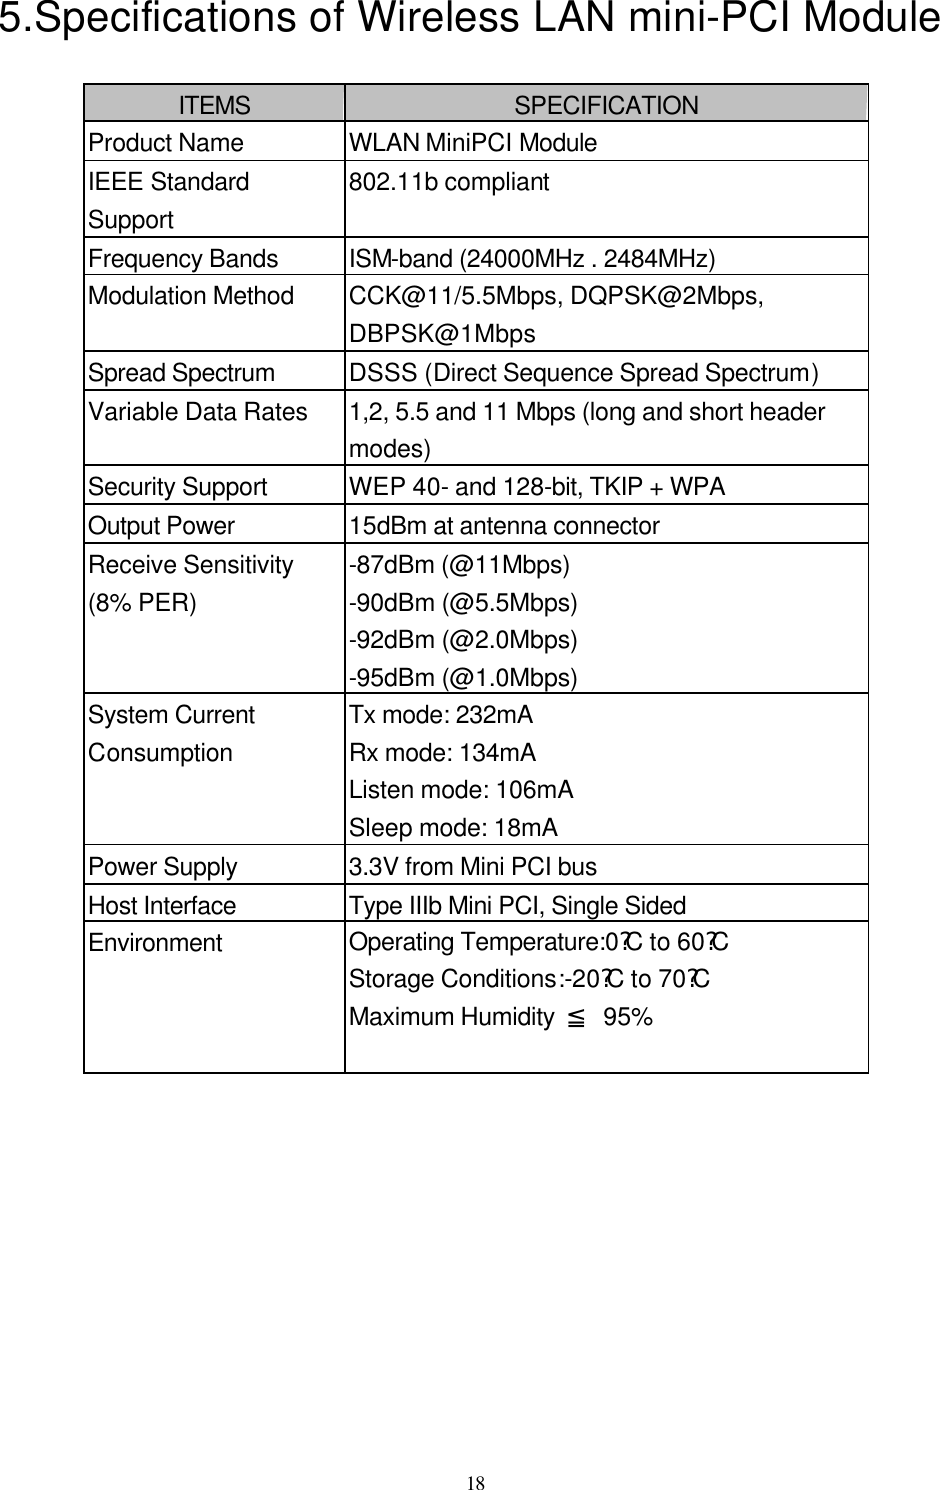  18  5.Specifications of Wireless LAN mini-PCI Module  ITEMS SPECIFICATION Product Name WLAN MiniPCI Module IEEE Standard Support 802.11b compliant Frequency Bands ISM-band (24000MHz . 2484MHz) Modulation Method CCK@11/5.5Mbps, DQPSK@2Mbps, DBPSK@1Mbps Spread Spectrum DSSS (Direct Sequence Spread Spectrum) Variable Data Rates 1,2, 5.5 and 11 Mbps (long and short header modes) Security Support WEP 40- and 128-bit, TKIP + WPA Output Power 15dBm at antenna connector Receive Sensitivity (8% PER) -87dBm (@11Mbps) -90dBm (@5.5Mbps) -92dBm (@2.0Mbps) -95dBm (@1.0Mbps) System Current Consumption Tx mode: 232mA Rx mode: 134mA Listen mode: 106mA Sleep mode: 18mA Power Supply 3.3V from Mini PCI bus Host Interface Type IIIb Mini PCI, Single Sided Environment Operating Temperature:0?C to 60?C Storage Conditions:-20?C to 70?C Maximum Humidity ≦ 95%  